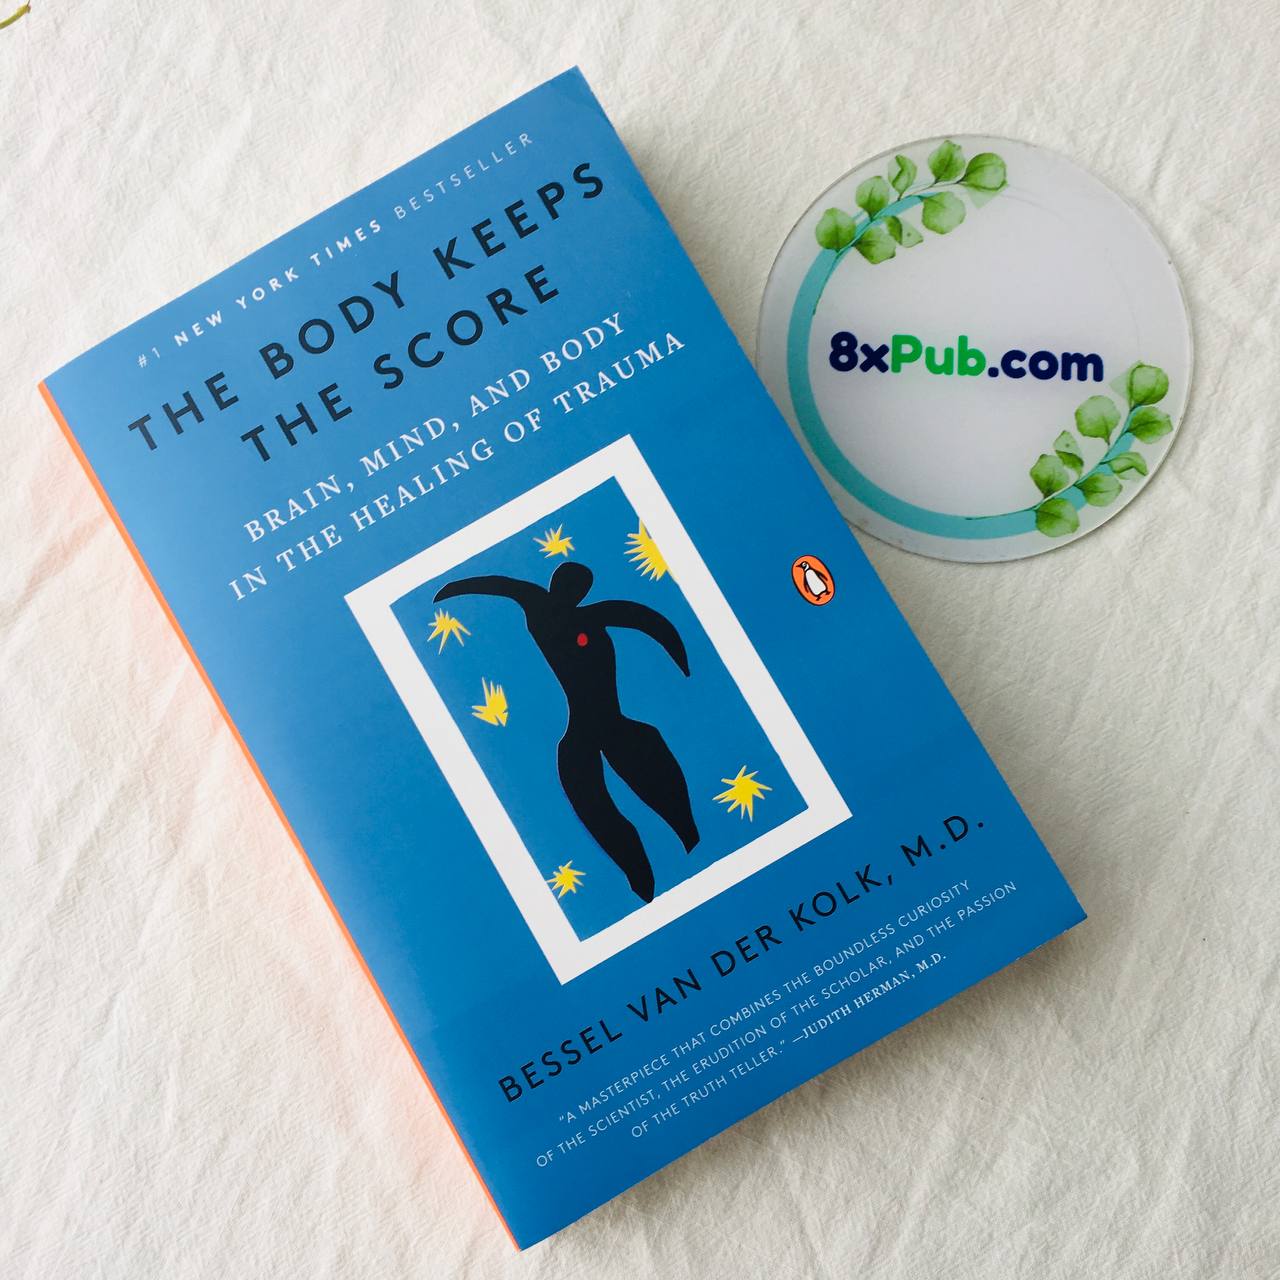 Book - The Body Keeps the Score : Brain Mind and Body in the Healing of Trauma